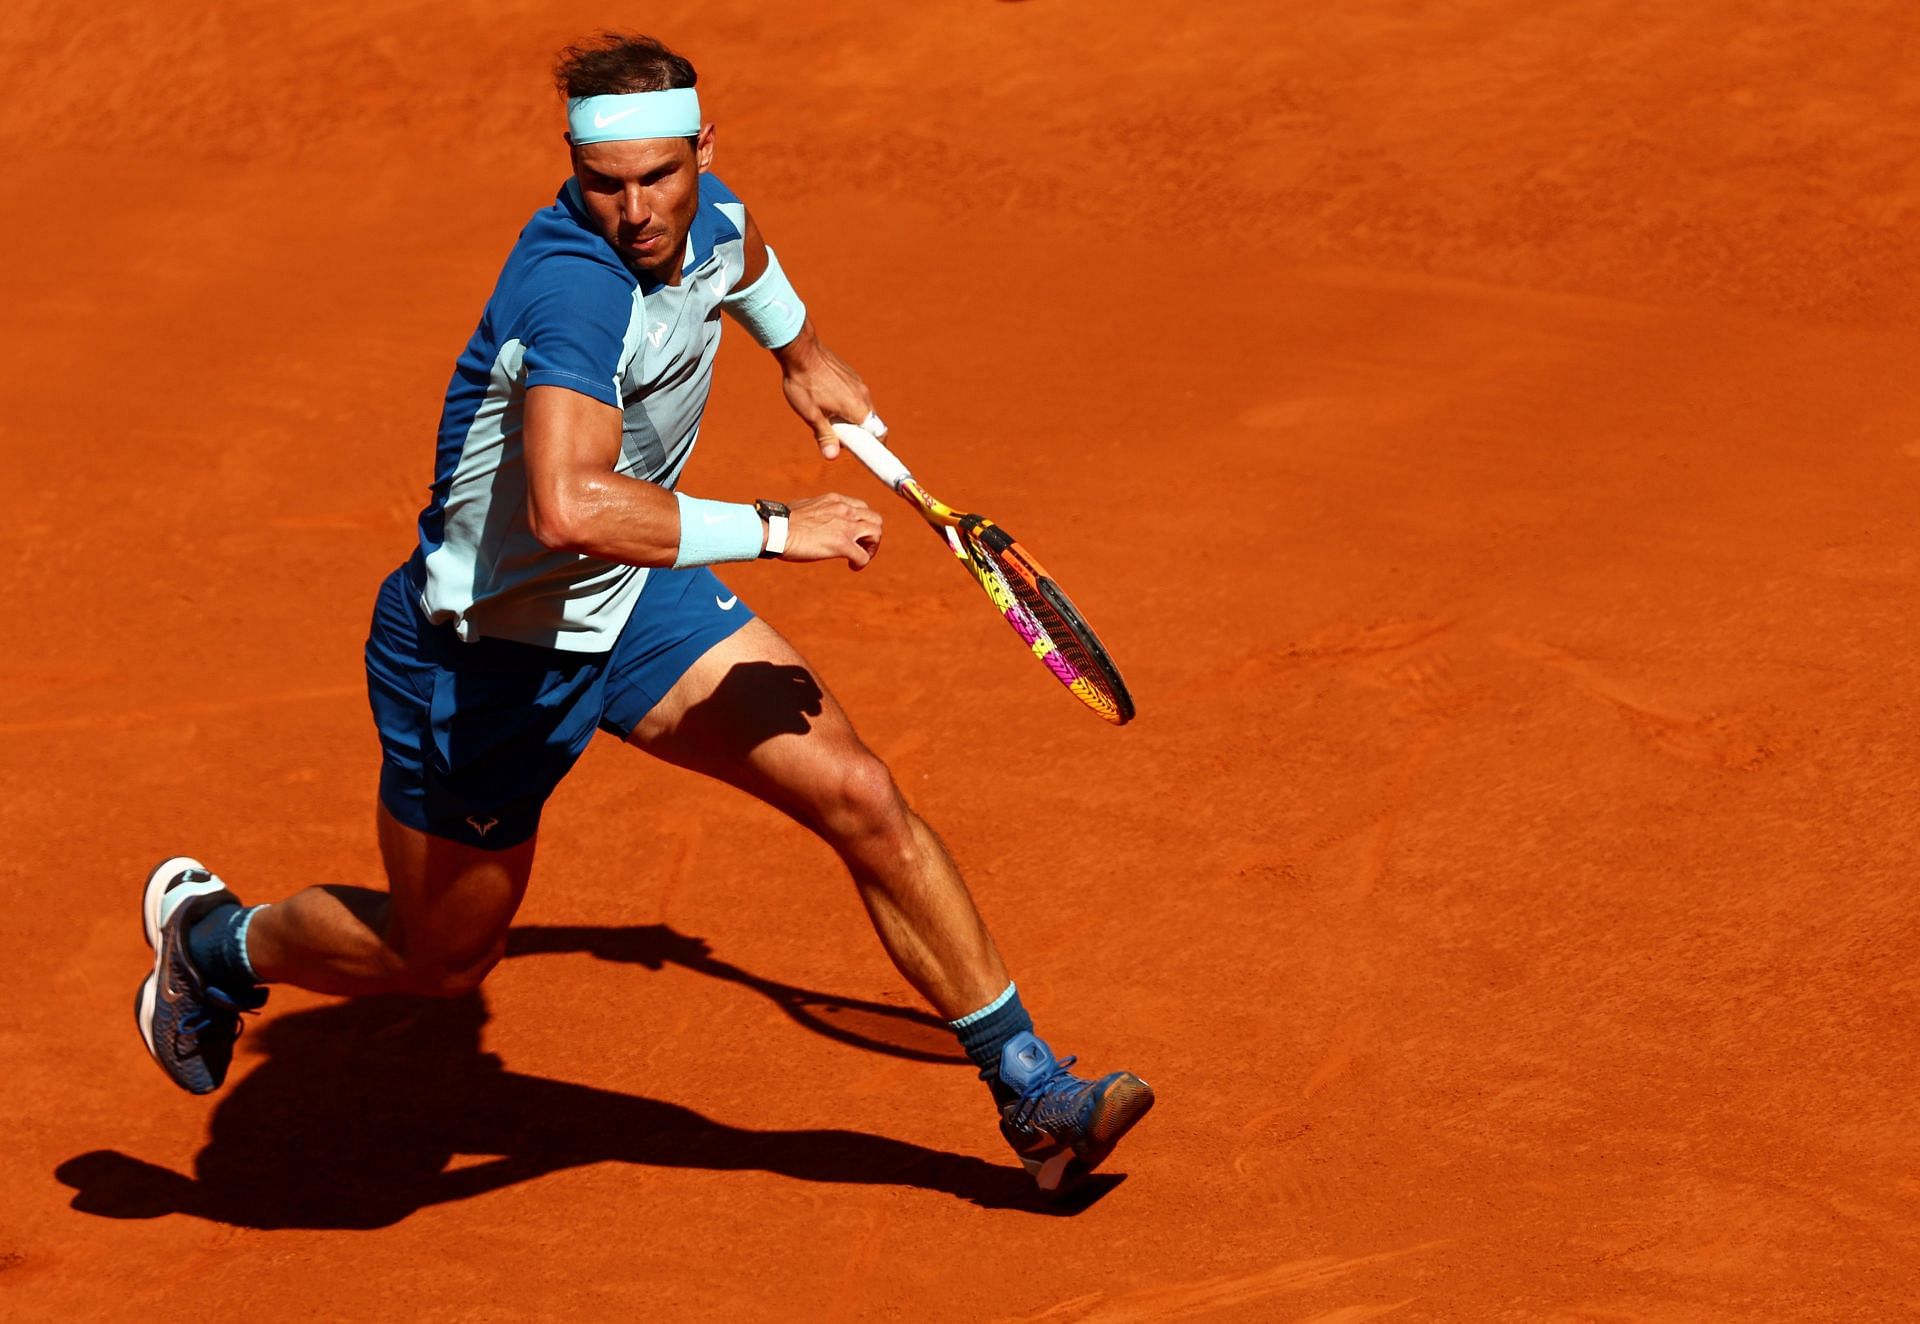 ATP Madrid Open 2022, today's results, scores, winners and recap